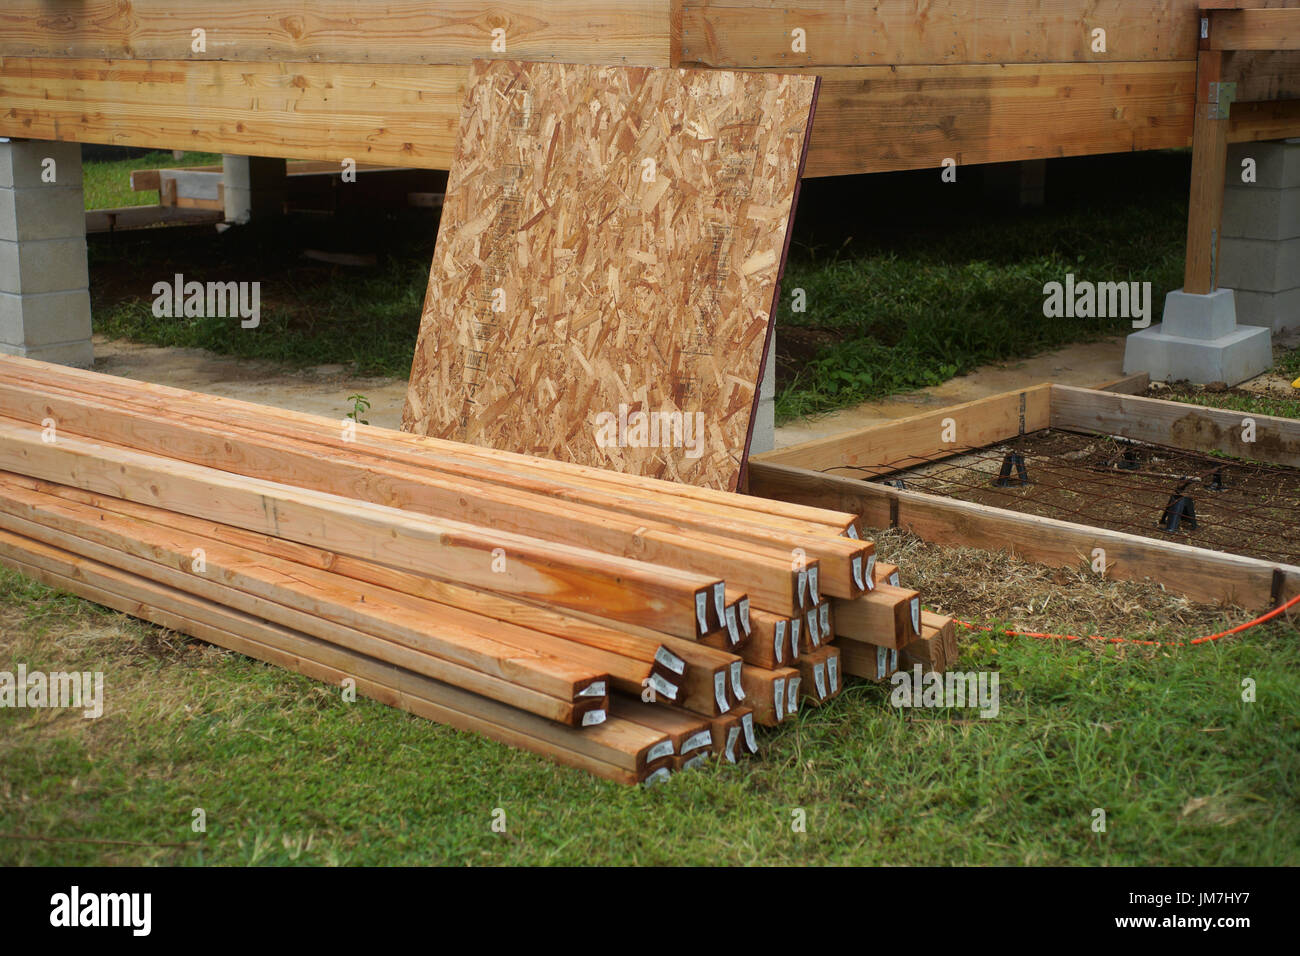 wood building material Stock Photo